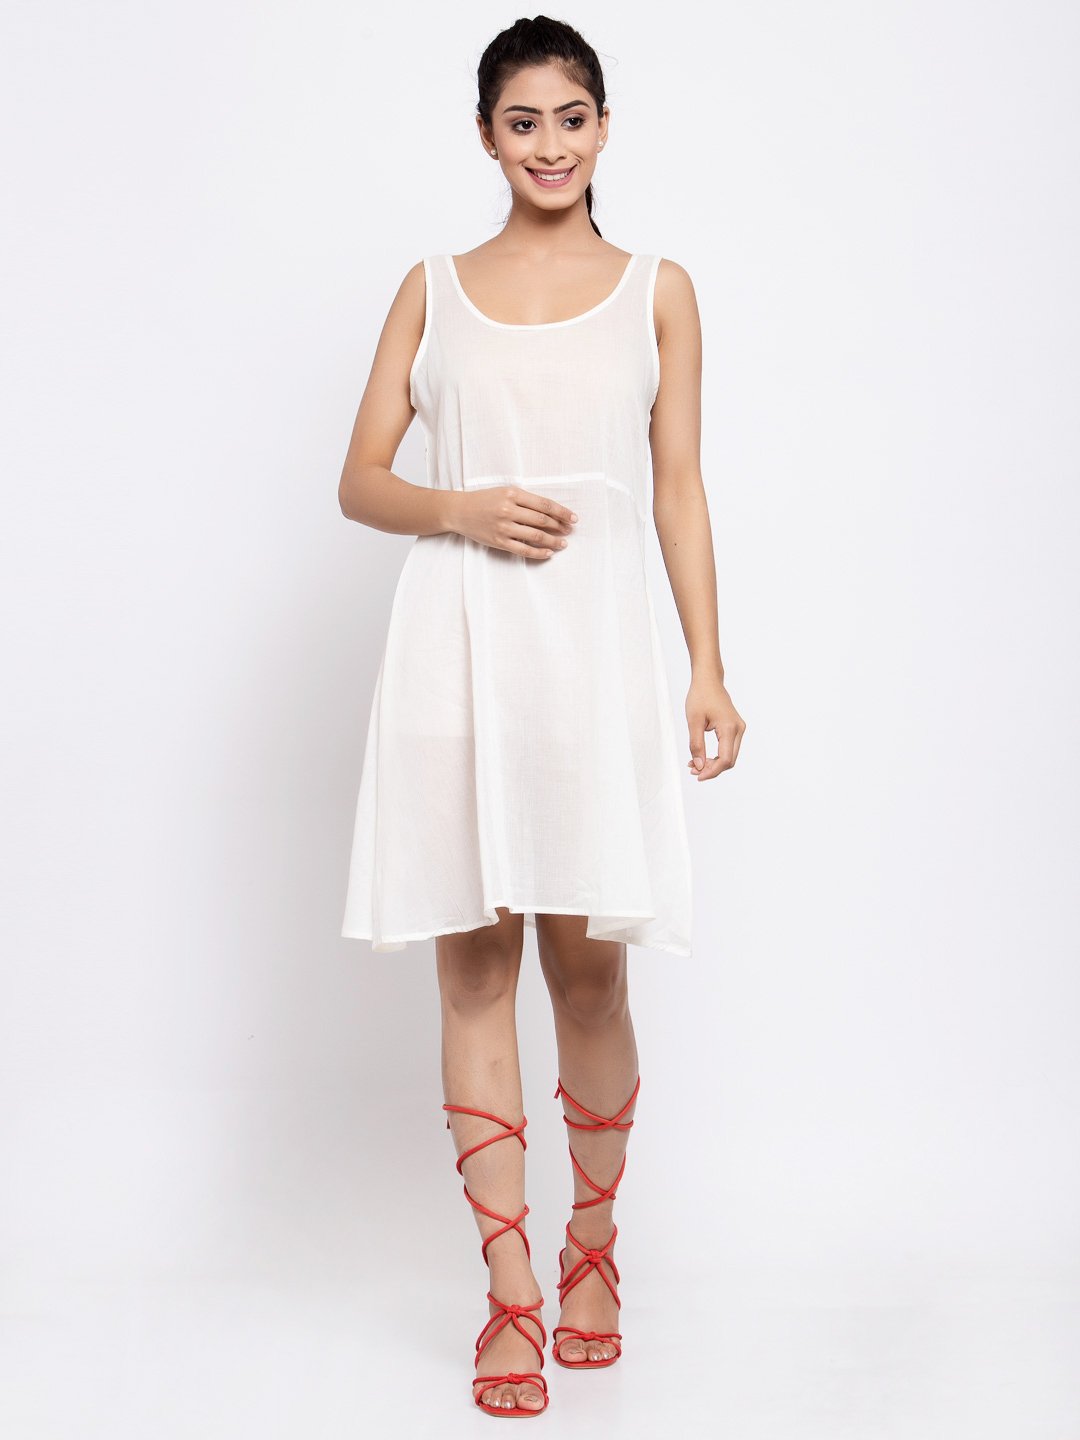 Terquois Dreamy Embroided Dress With Braided Belt Dresses TERQUOIS   